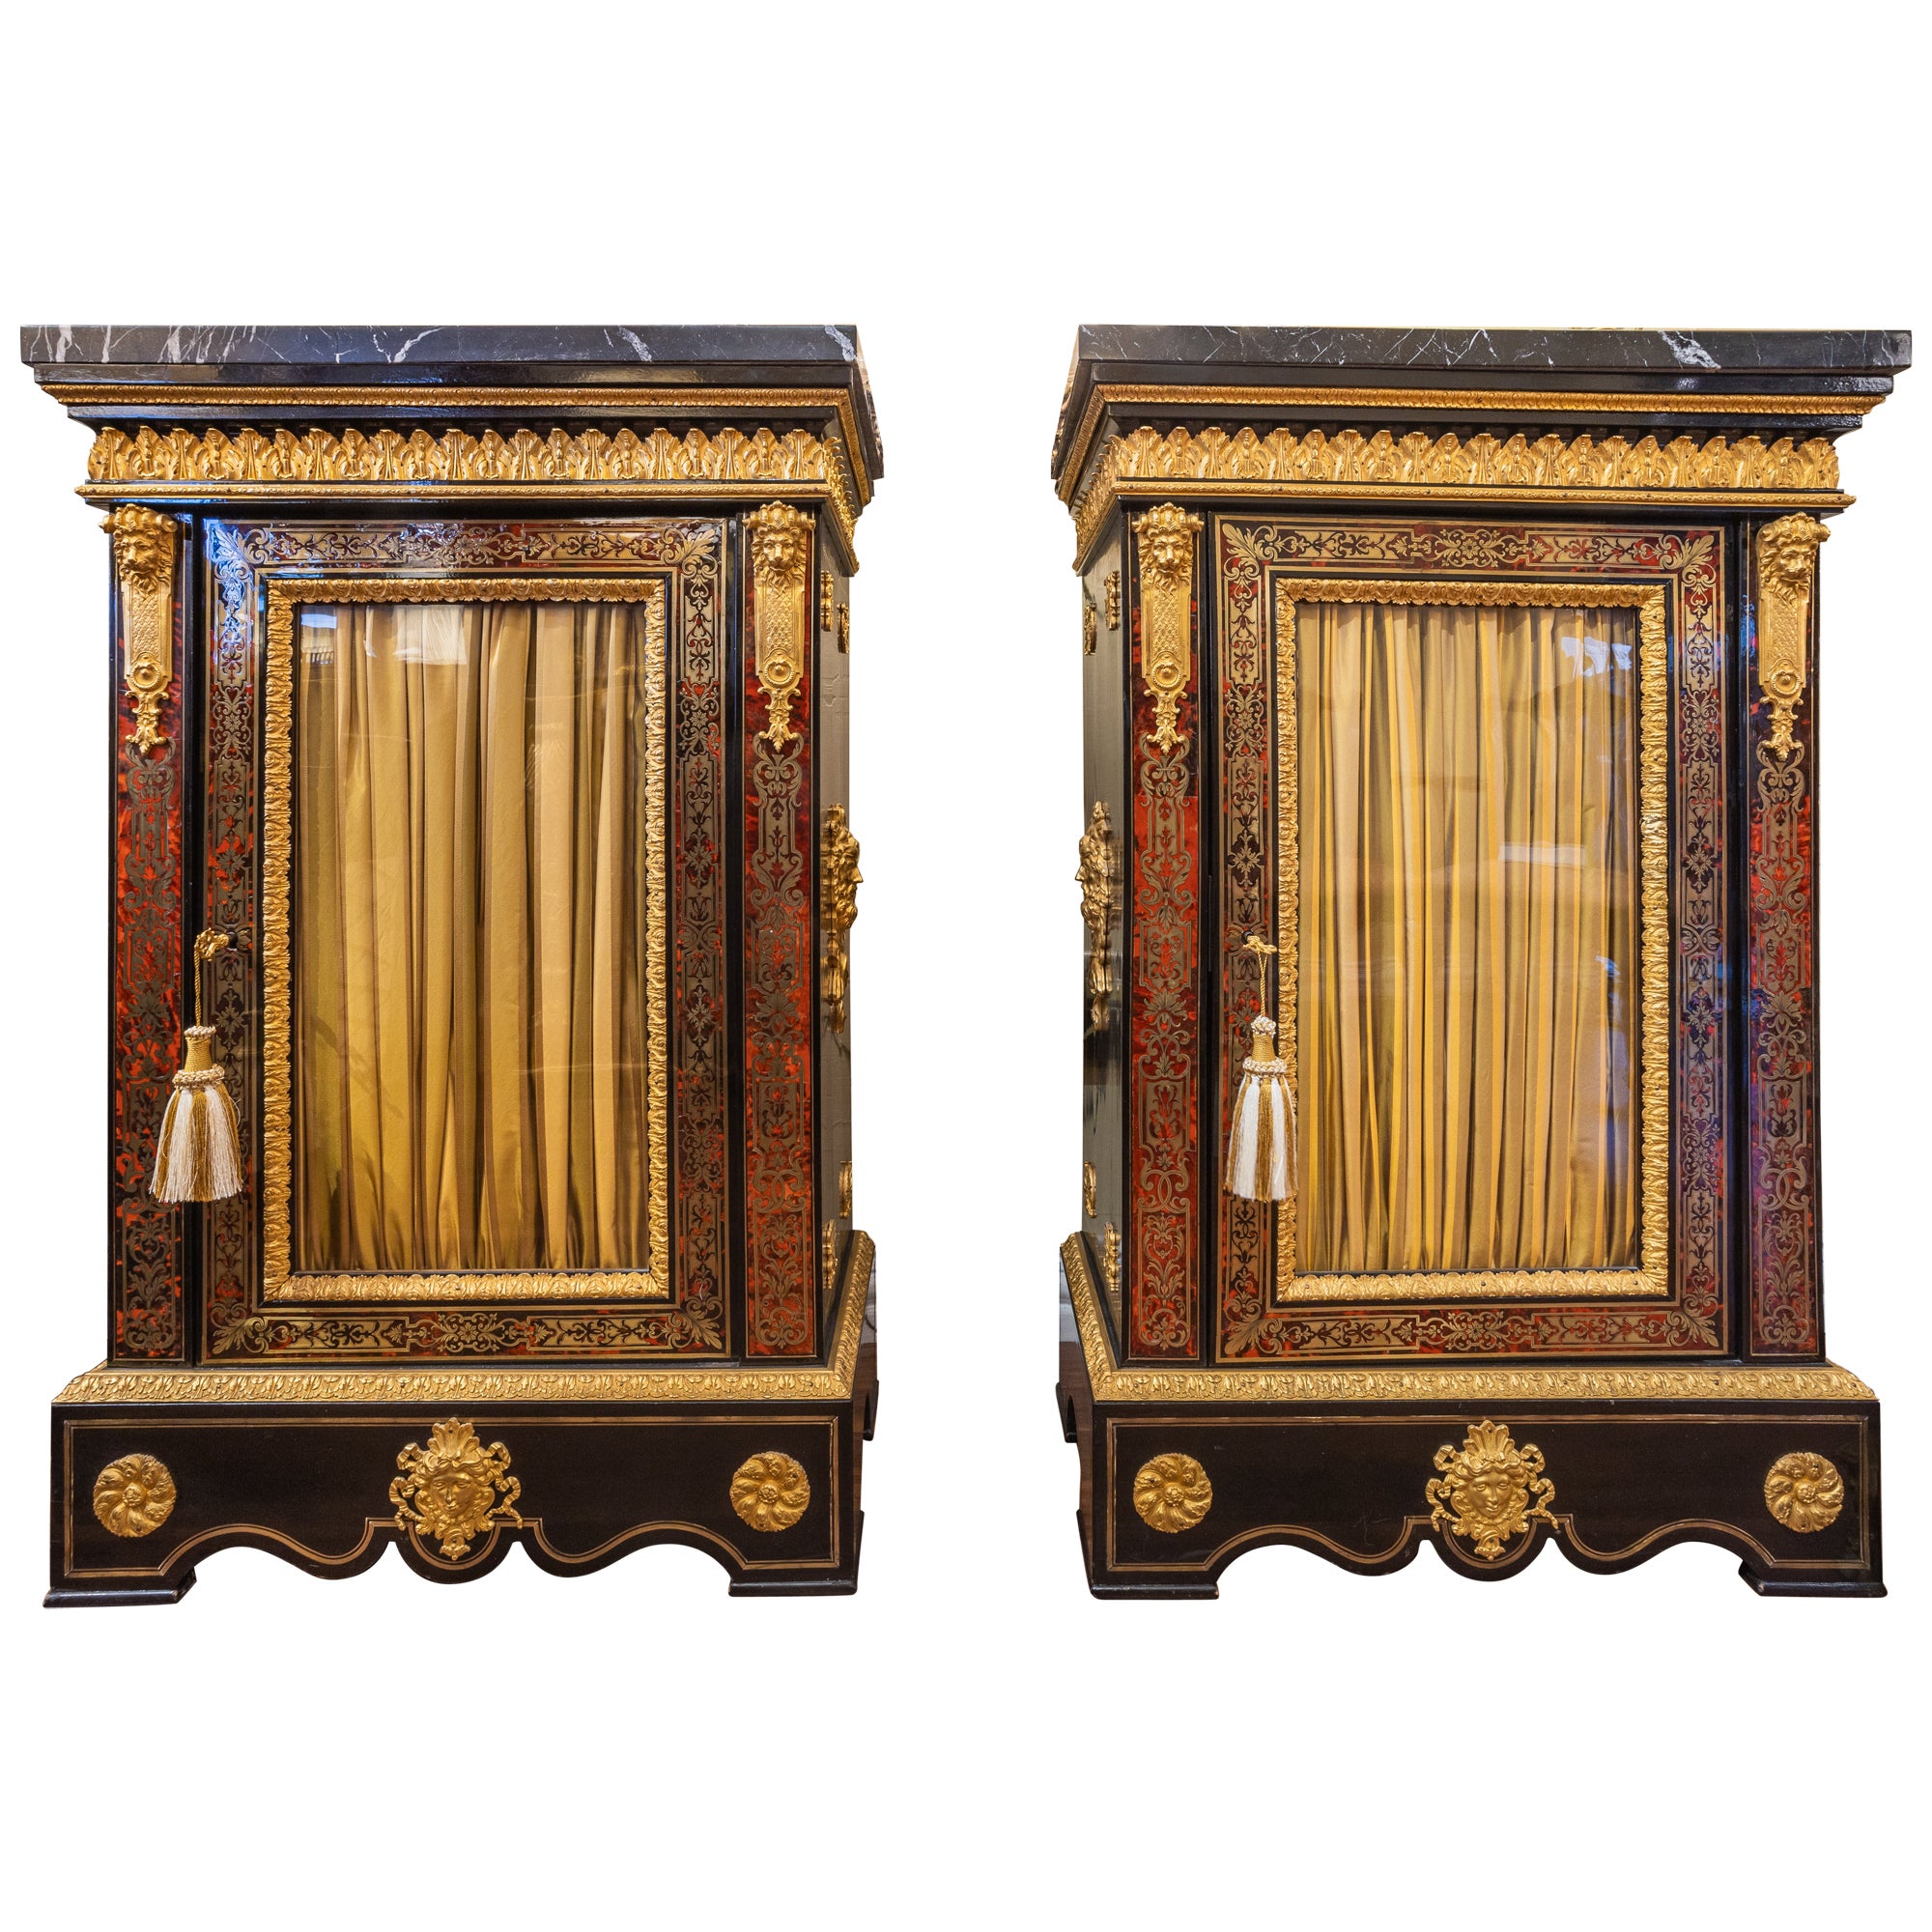 A fine pair of French Boulle and gilt bronze mounted cabinets. Black marble tops